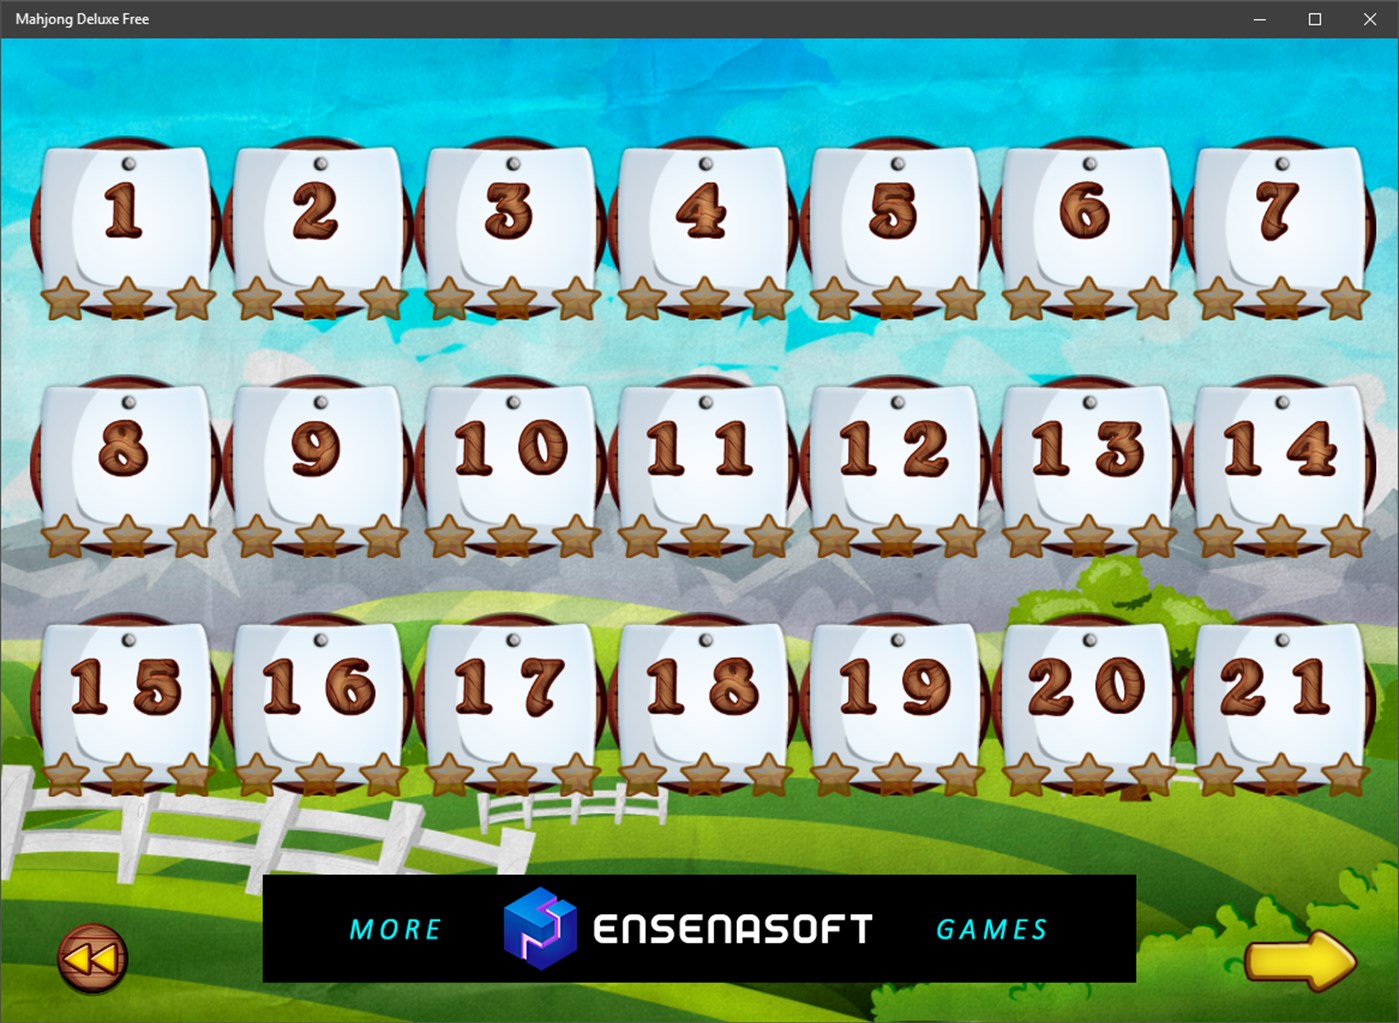 instal the last version for android Mahjong Deluxe Free